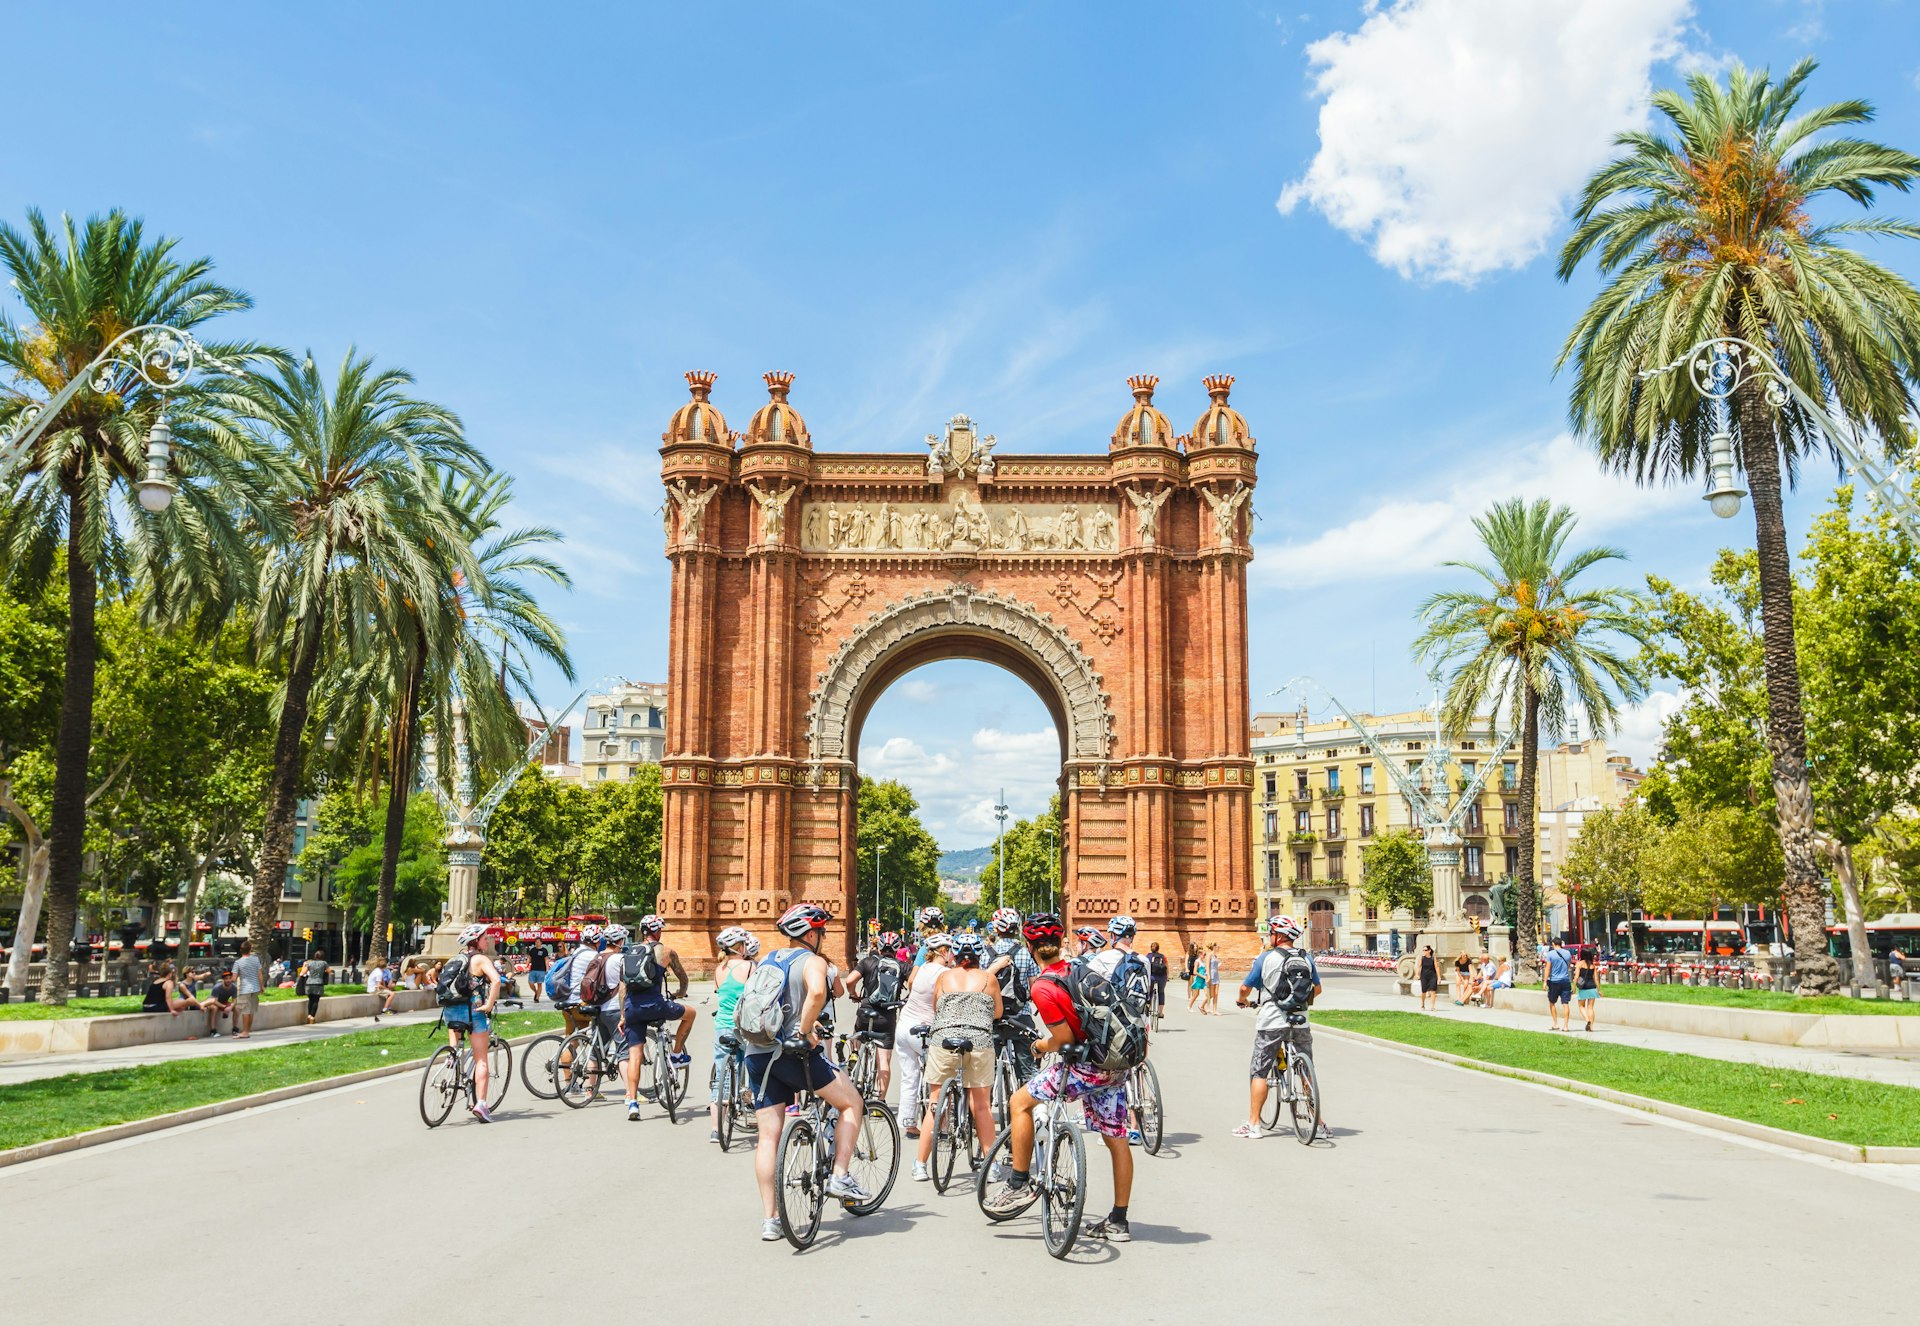 A group of people on bicycles in front of the Arc de Triomf in Barcelona